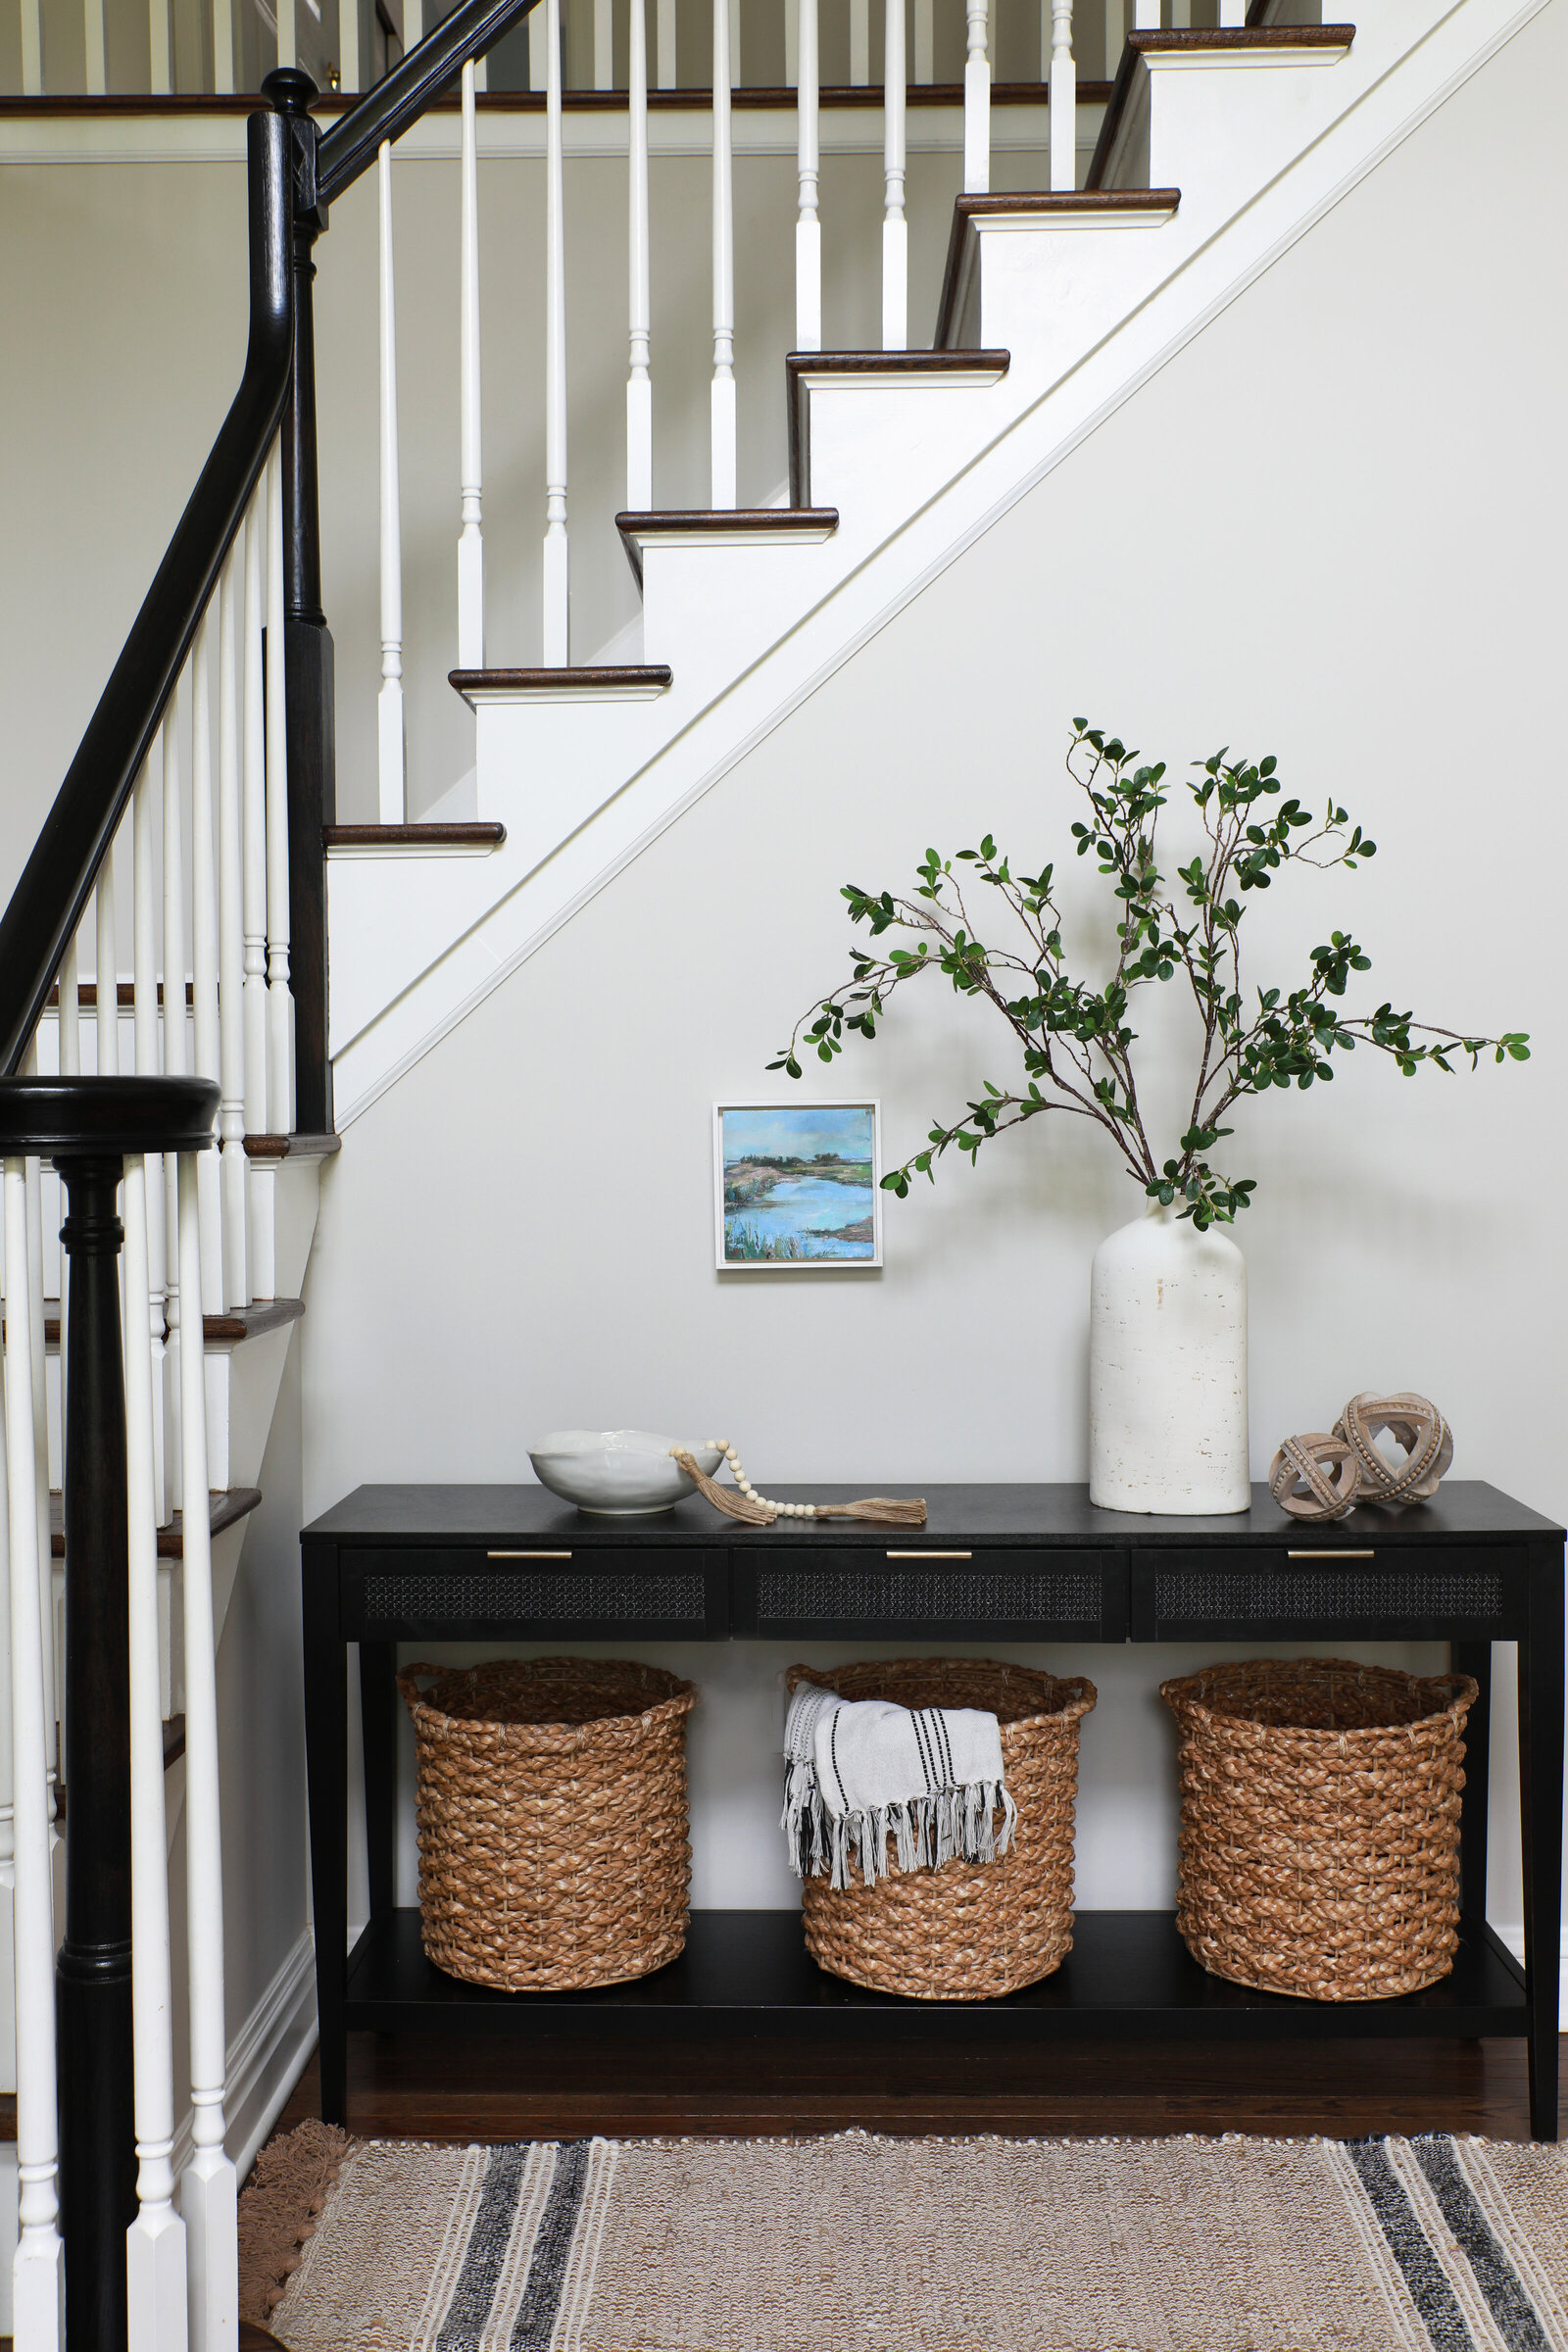 STYLED-FOYER-TABLE-WITH-BLACK-RAILINGS